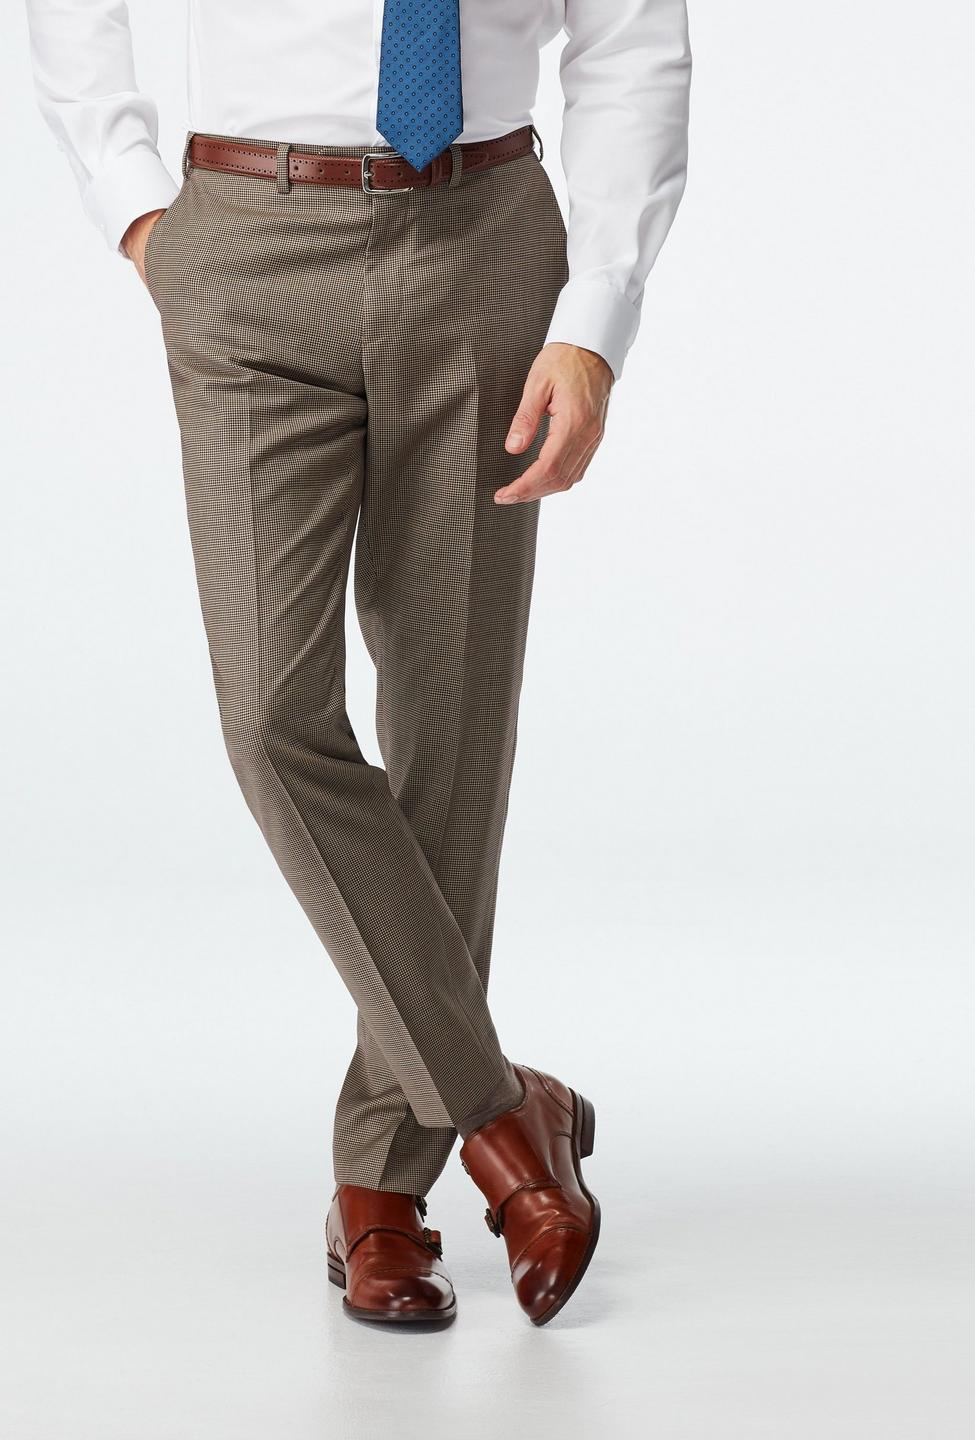 Brown pants - Sunderland Houndstooth Design from Seasonal Indochino Collection